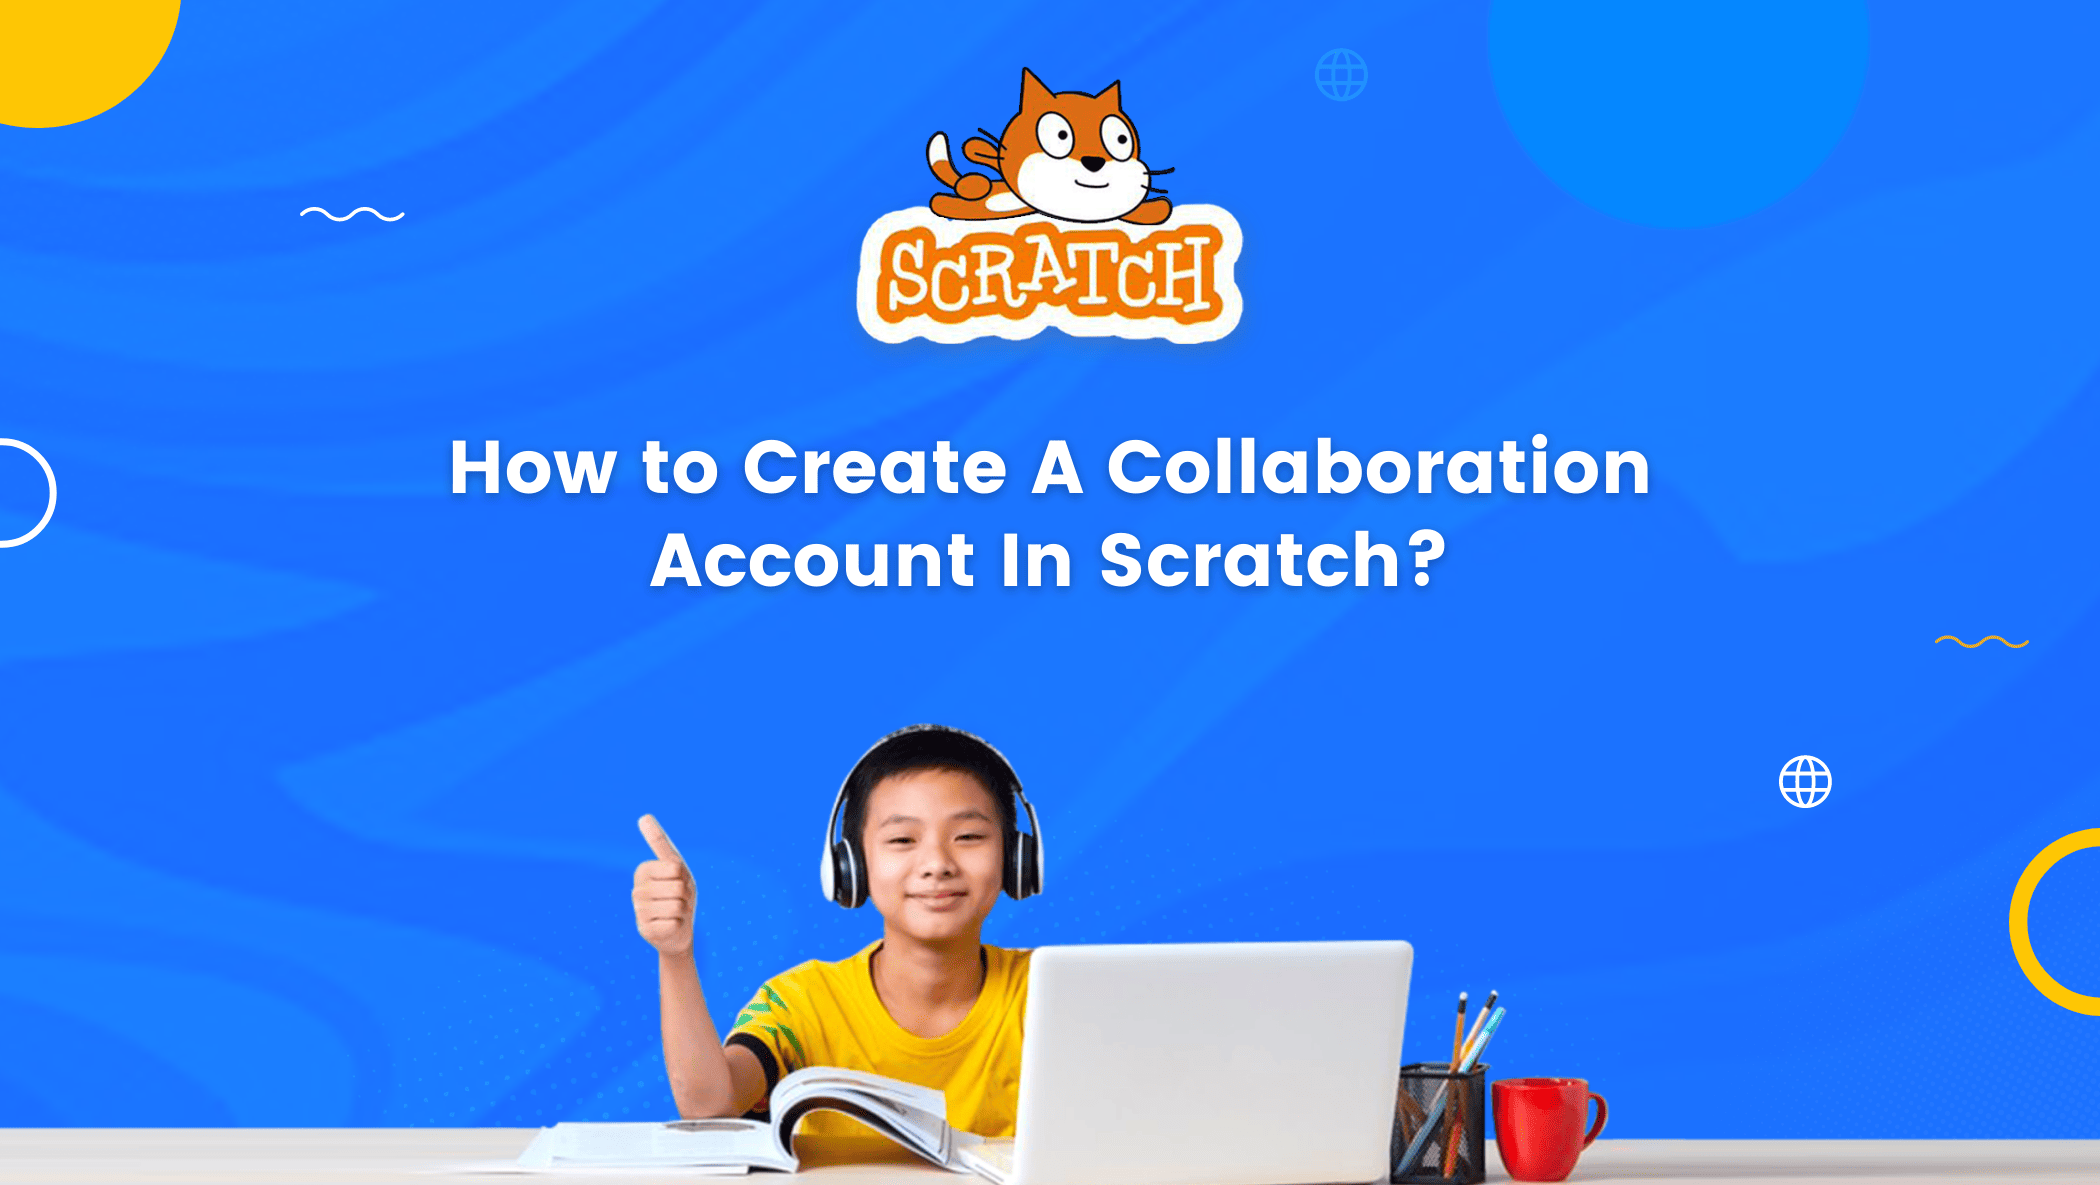 Scratch Mit - How to Log In and Get Started